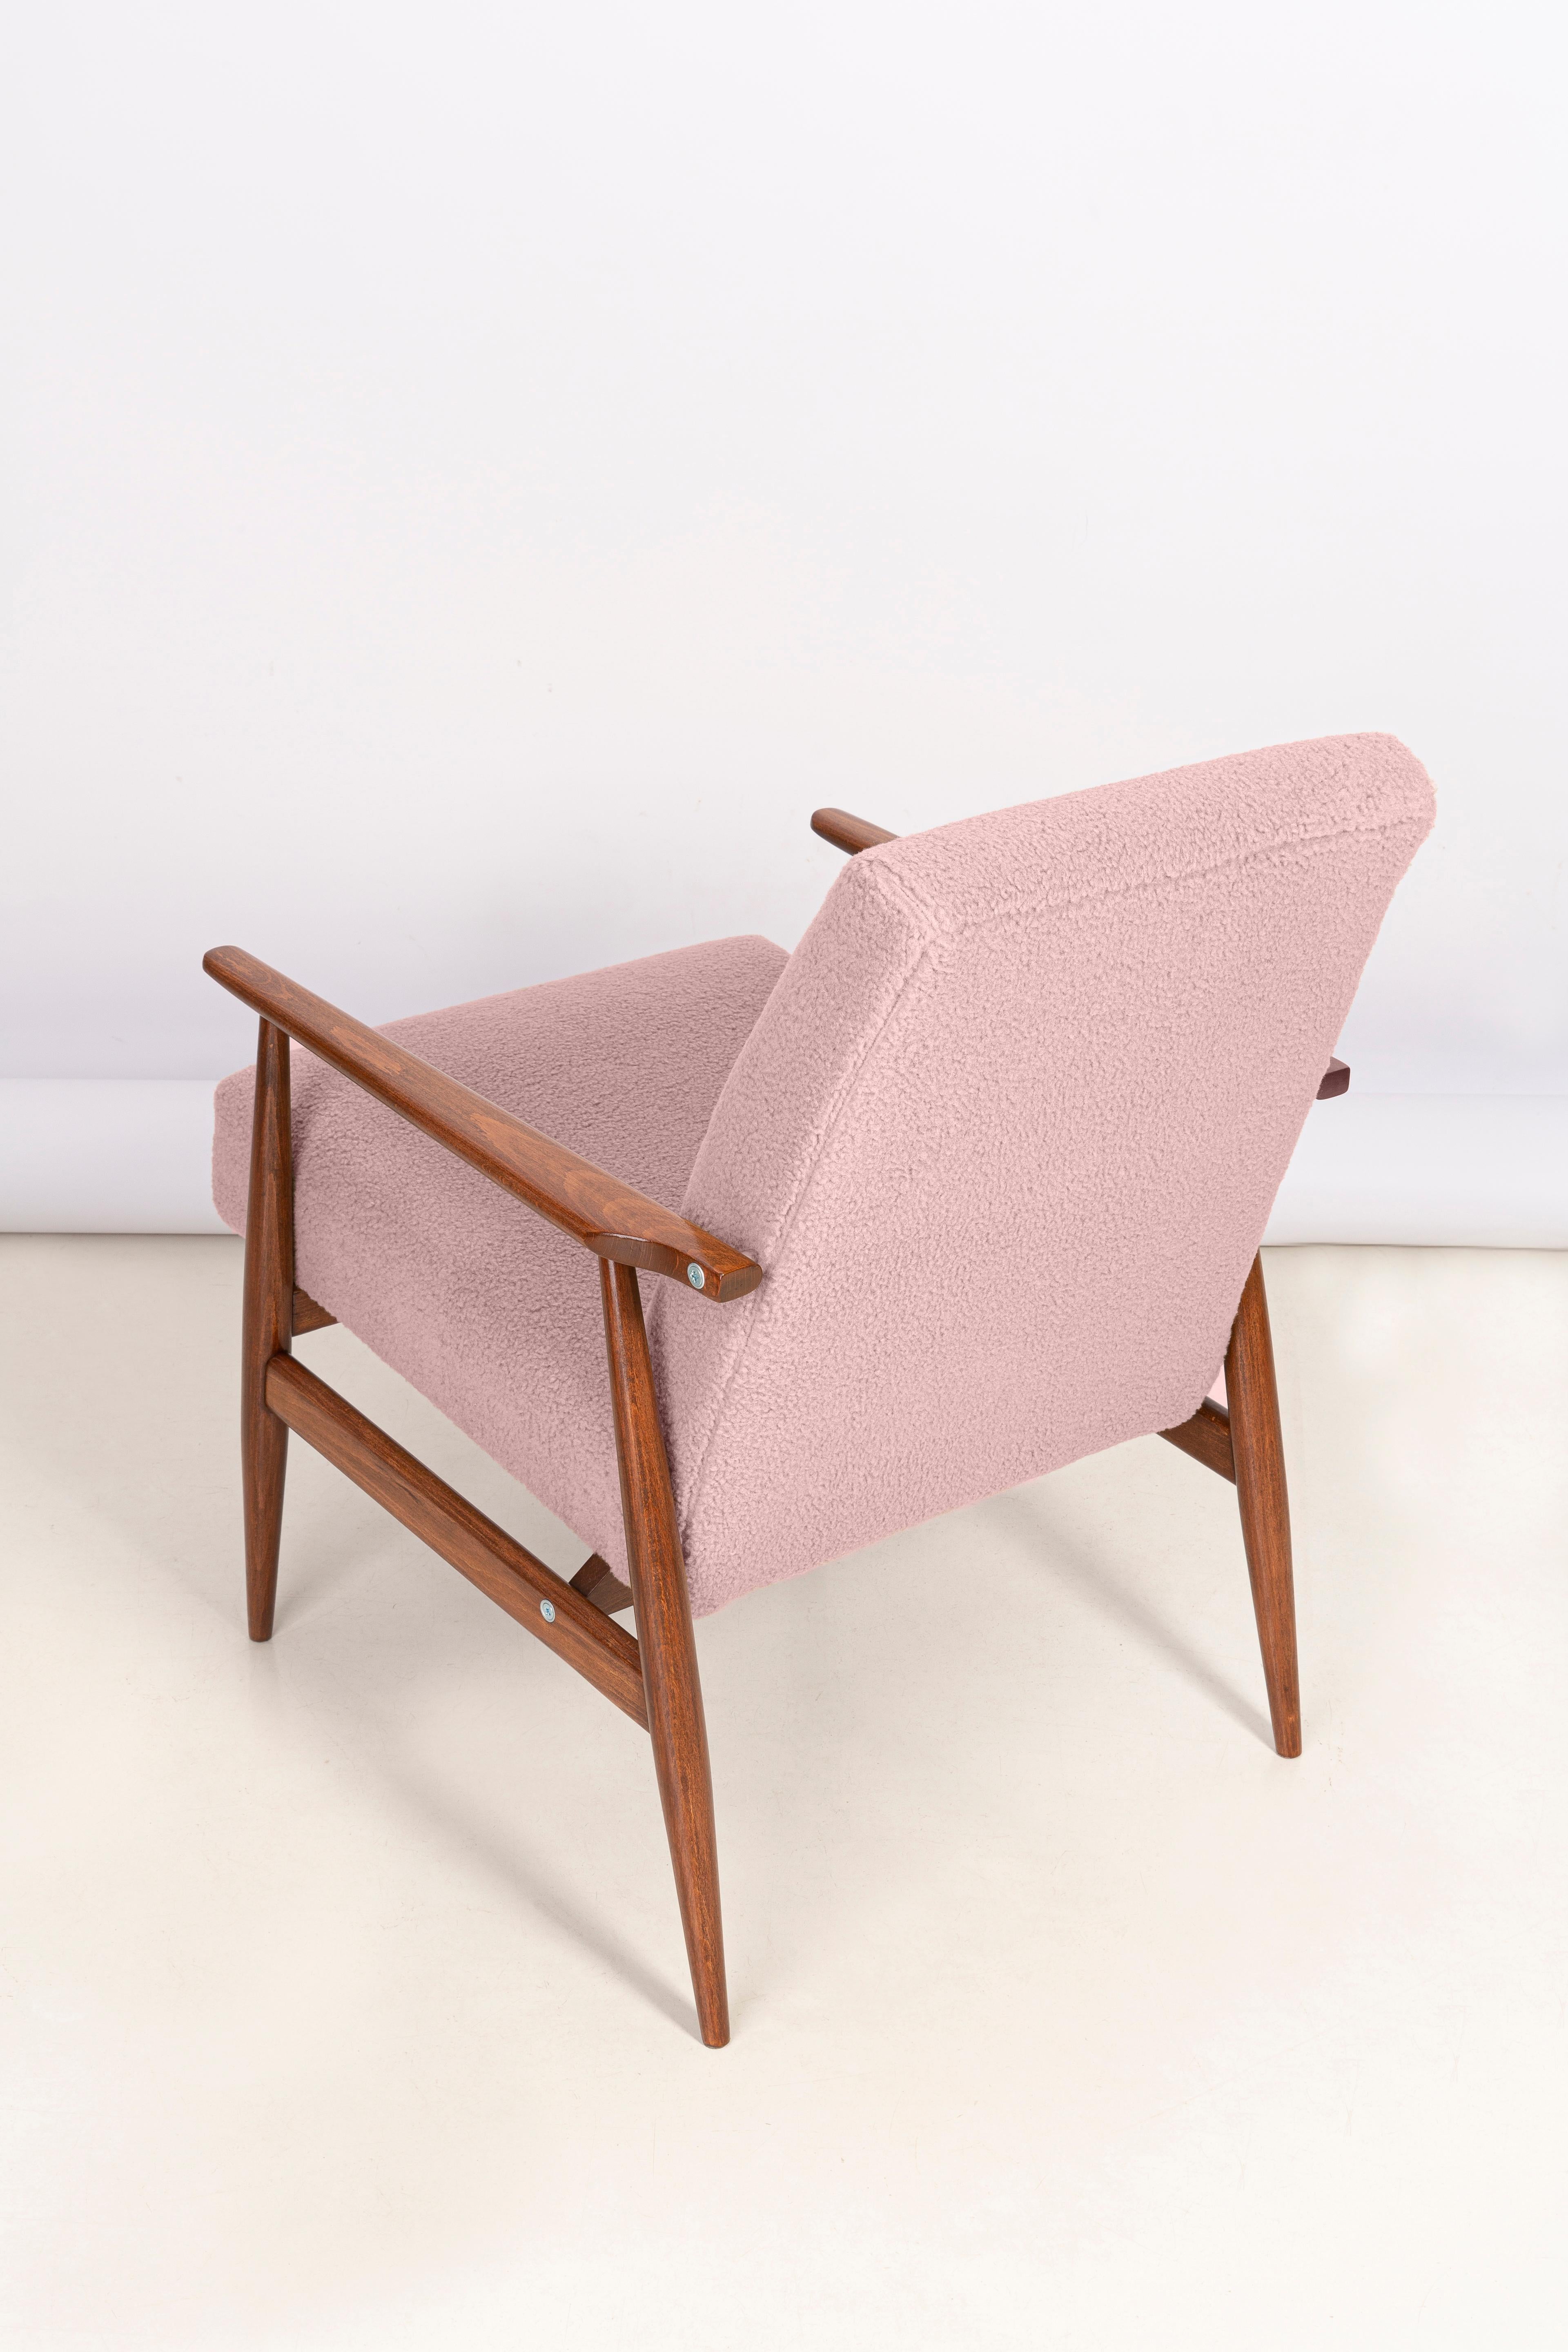 Pair of Dusty Pink Bouclé Dante Armchairs, H. Lis, Europe, 1960s For Sale 5